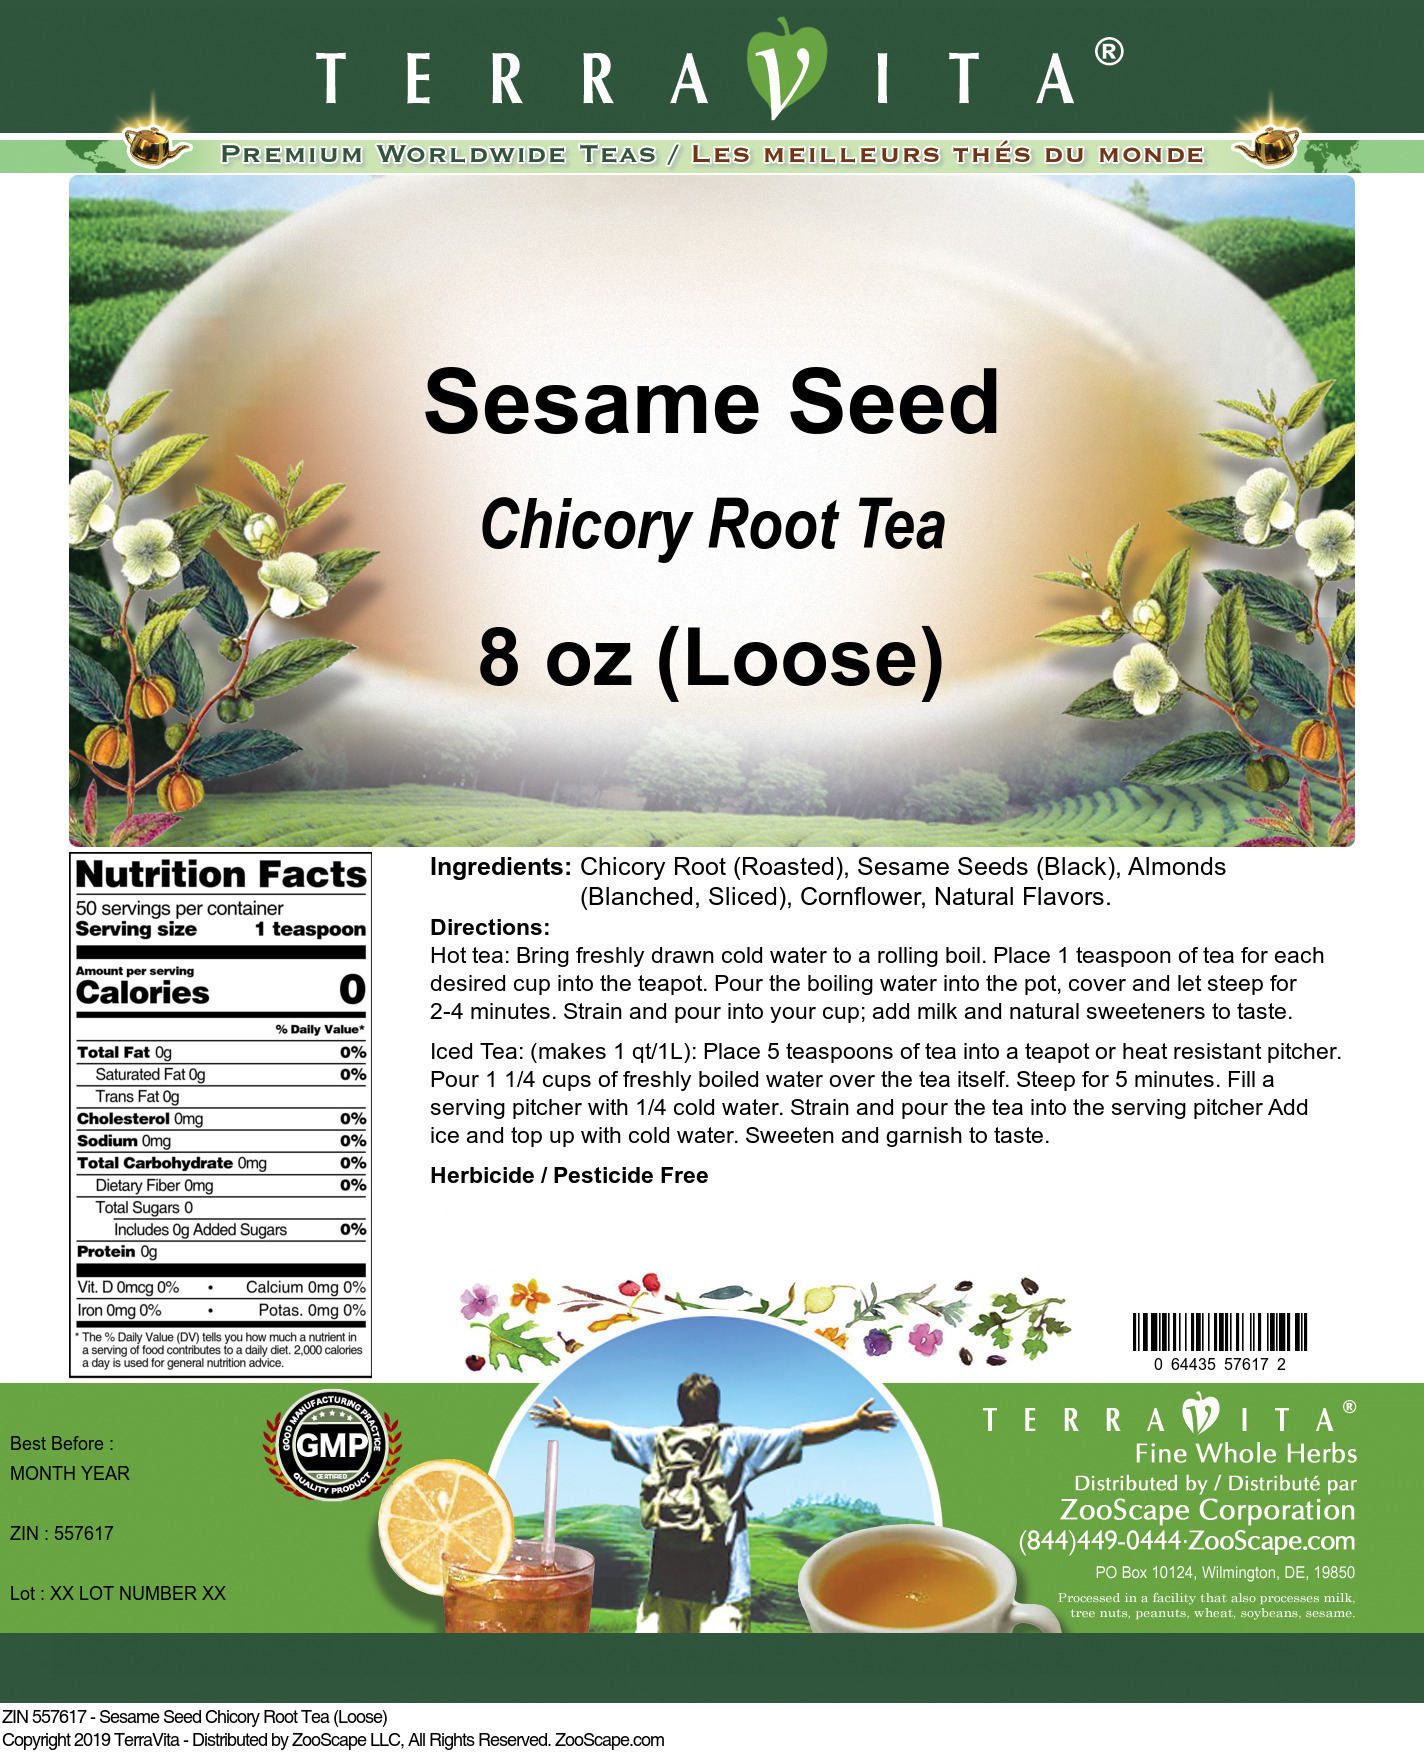 Sesame Seed Chicory Root Tea (Loose) - Label